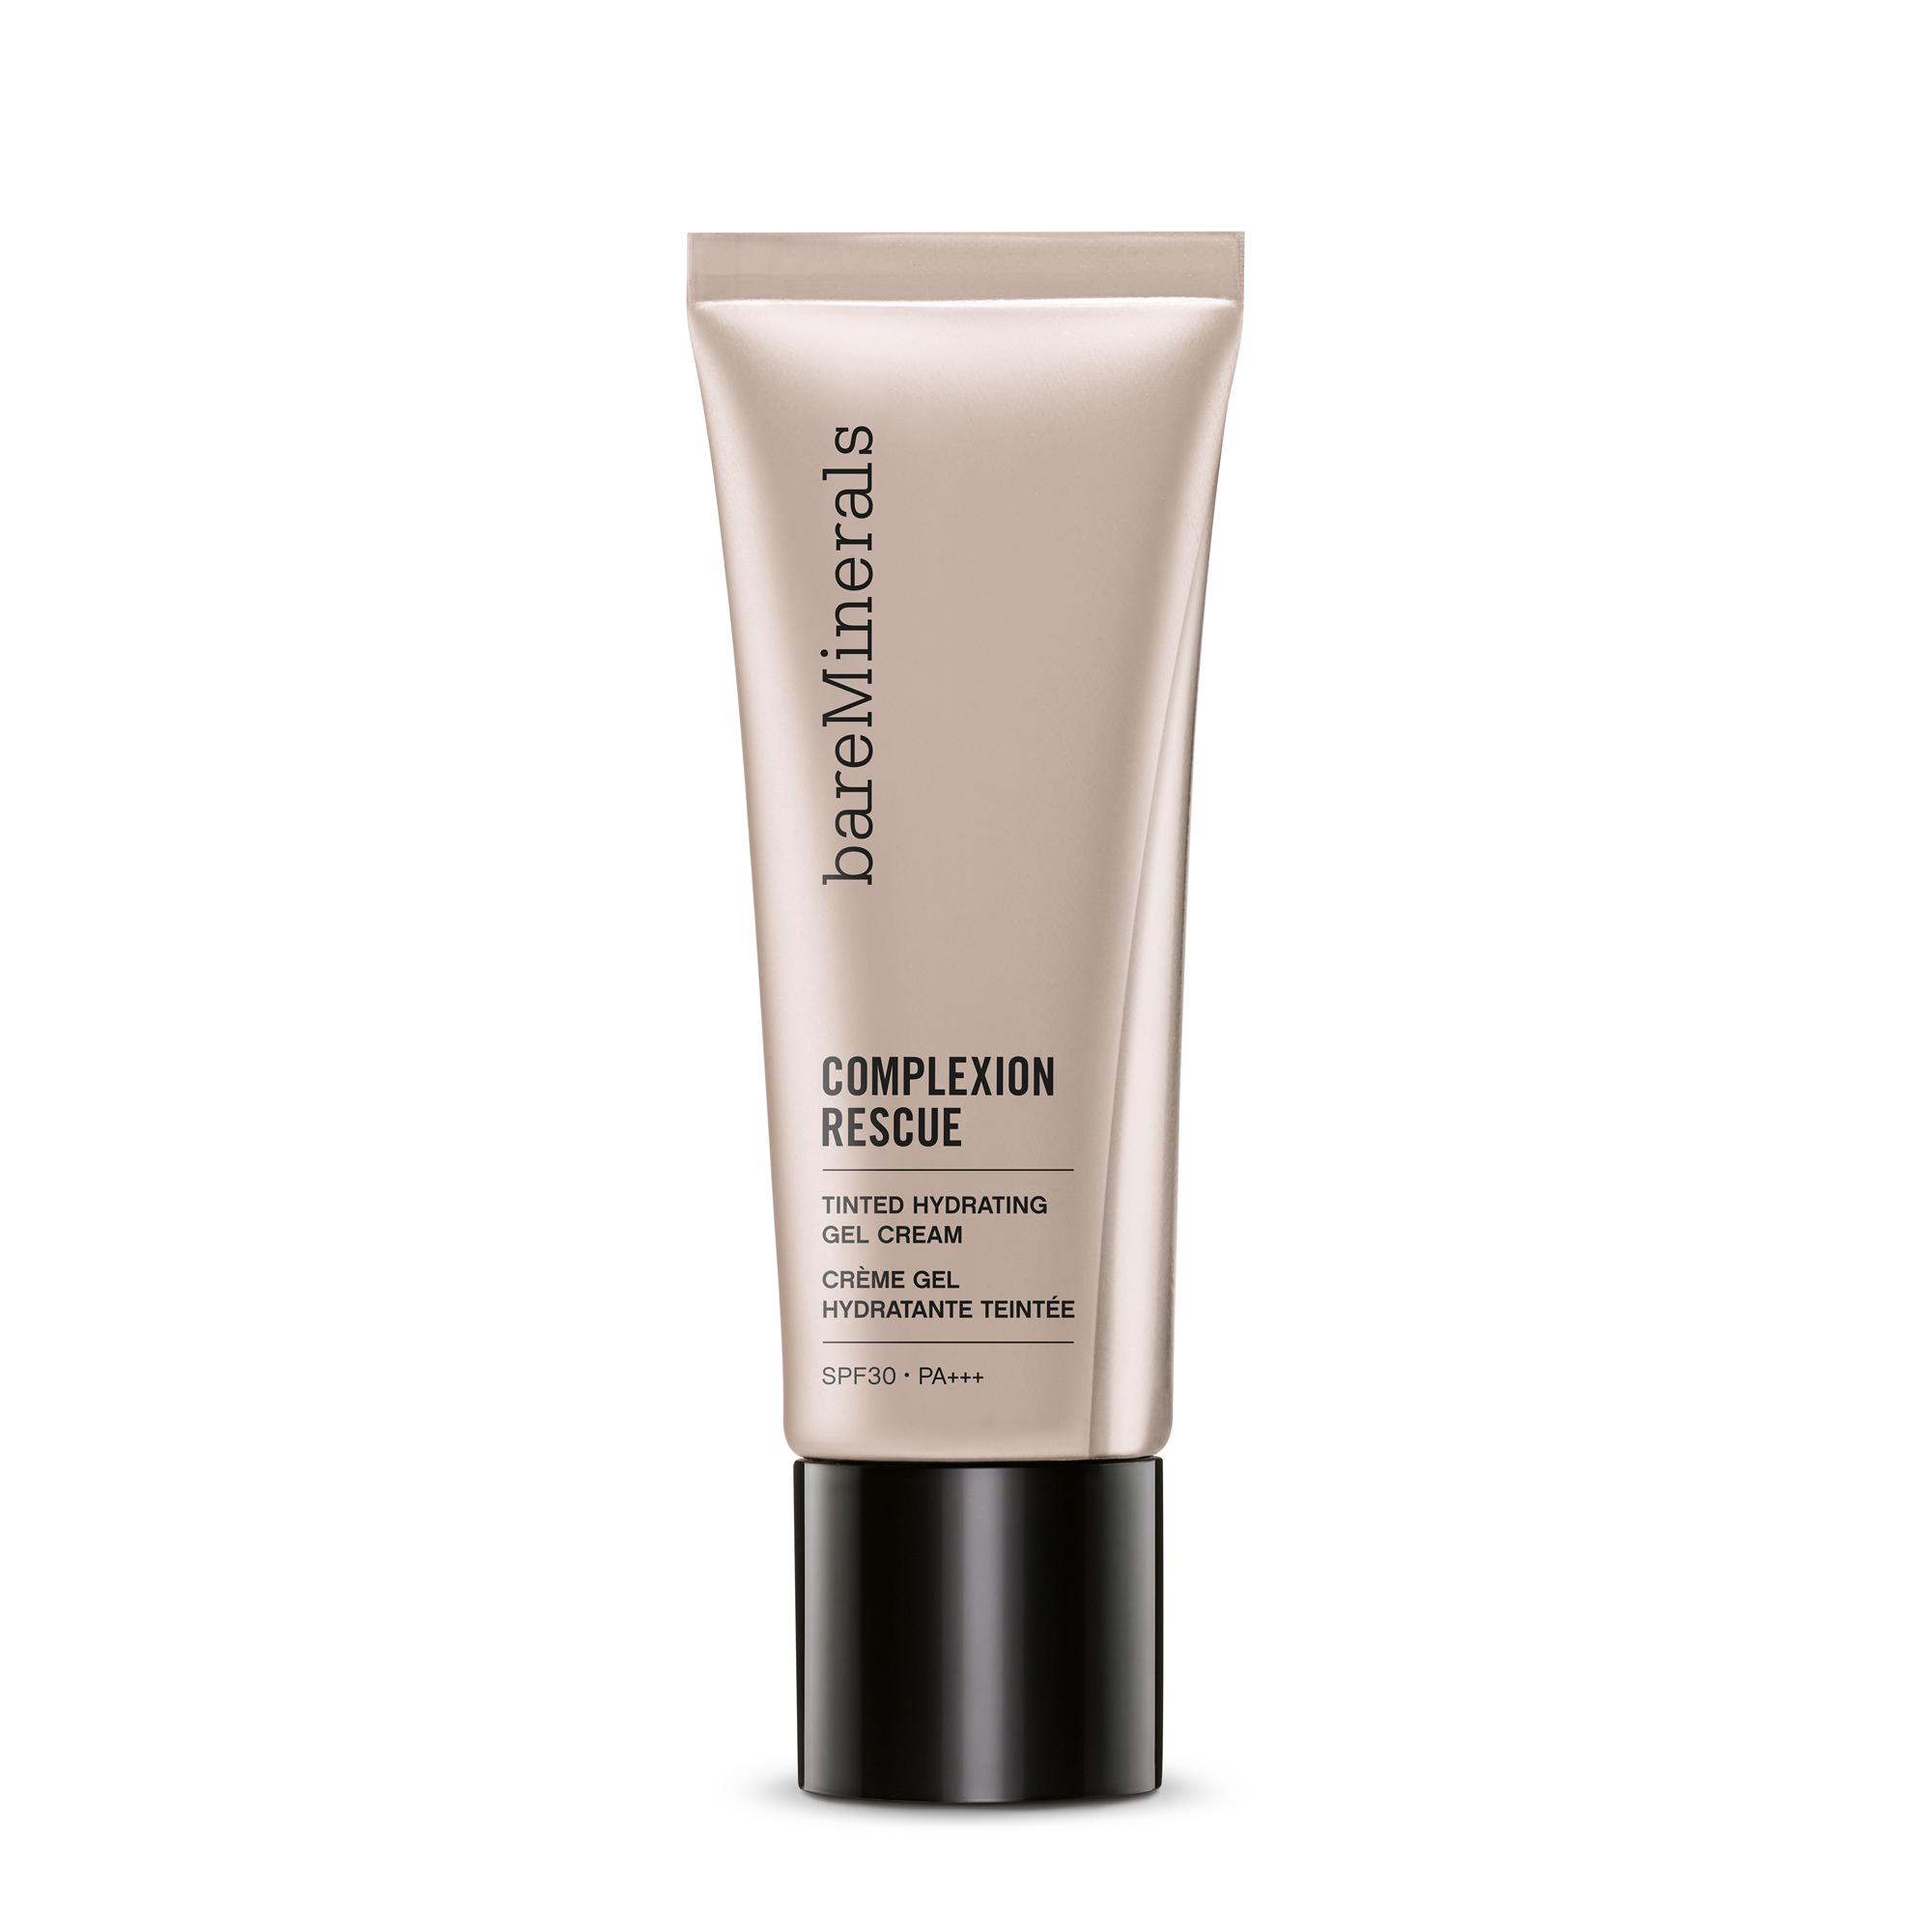  Complexion Rescue Tinted Hydrating Gel Cream